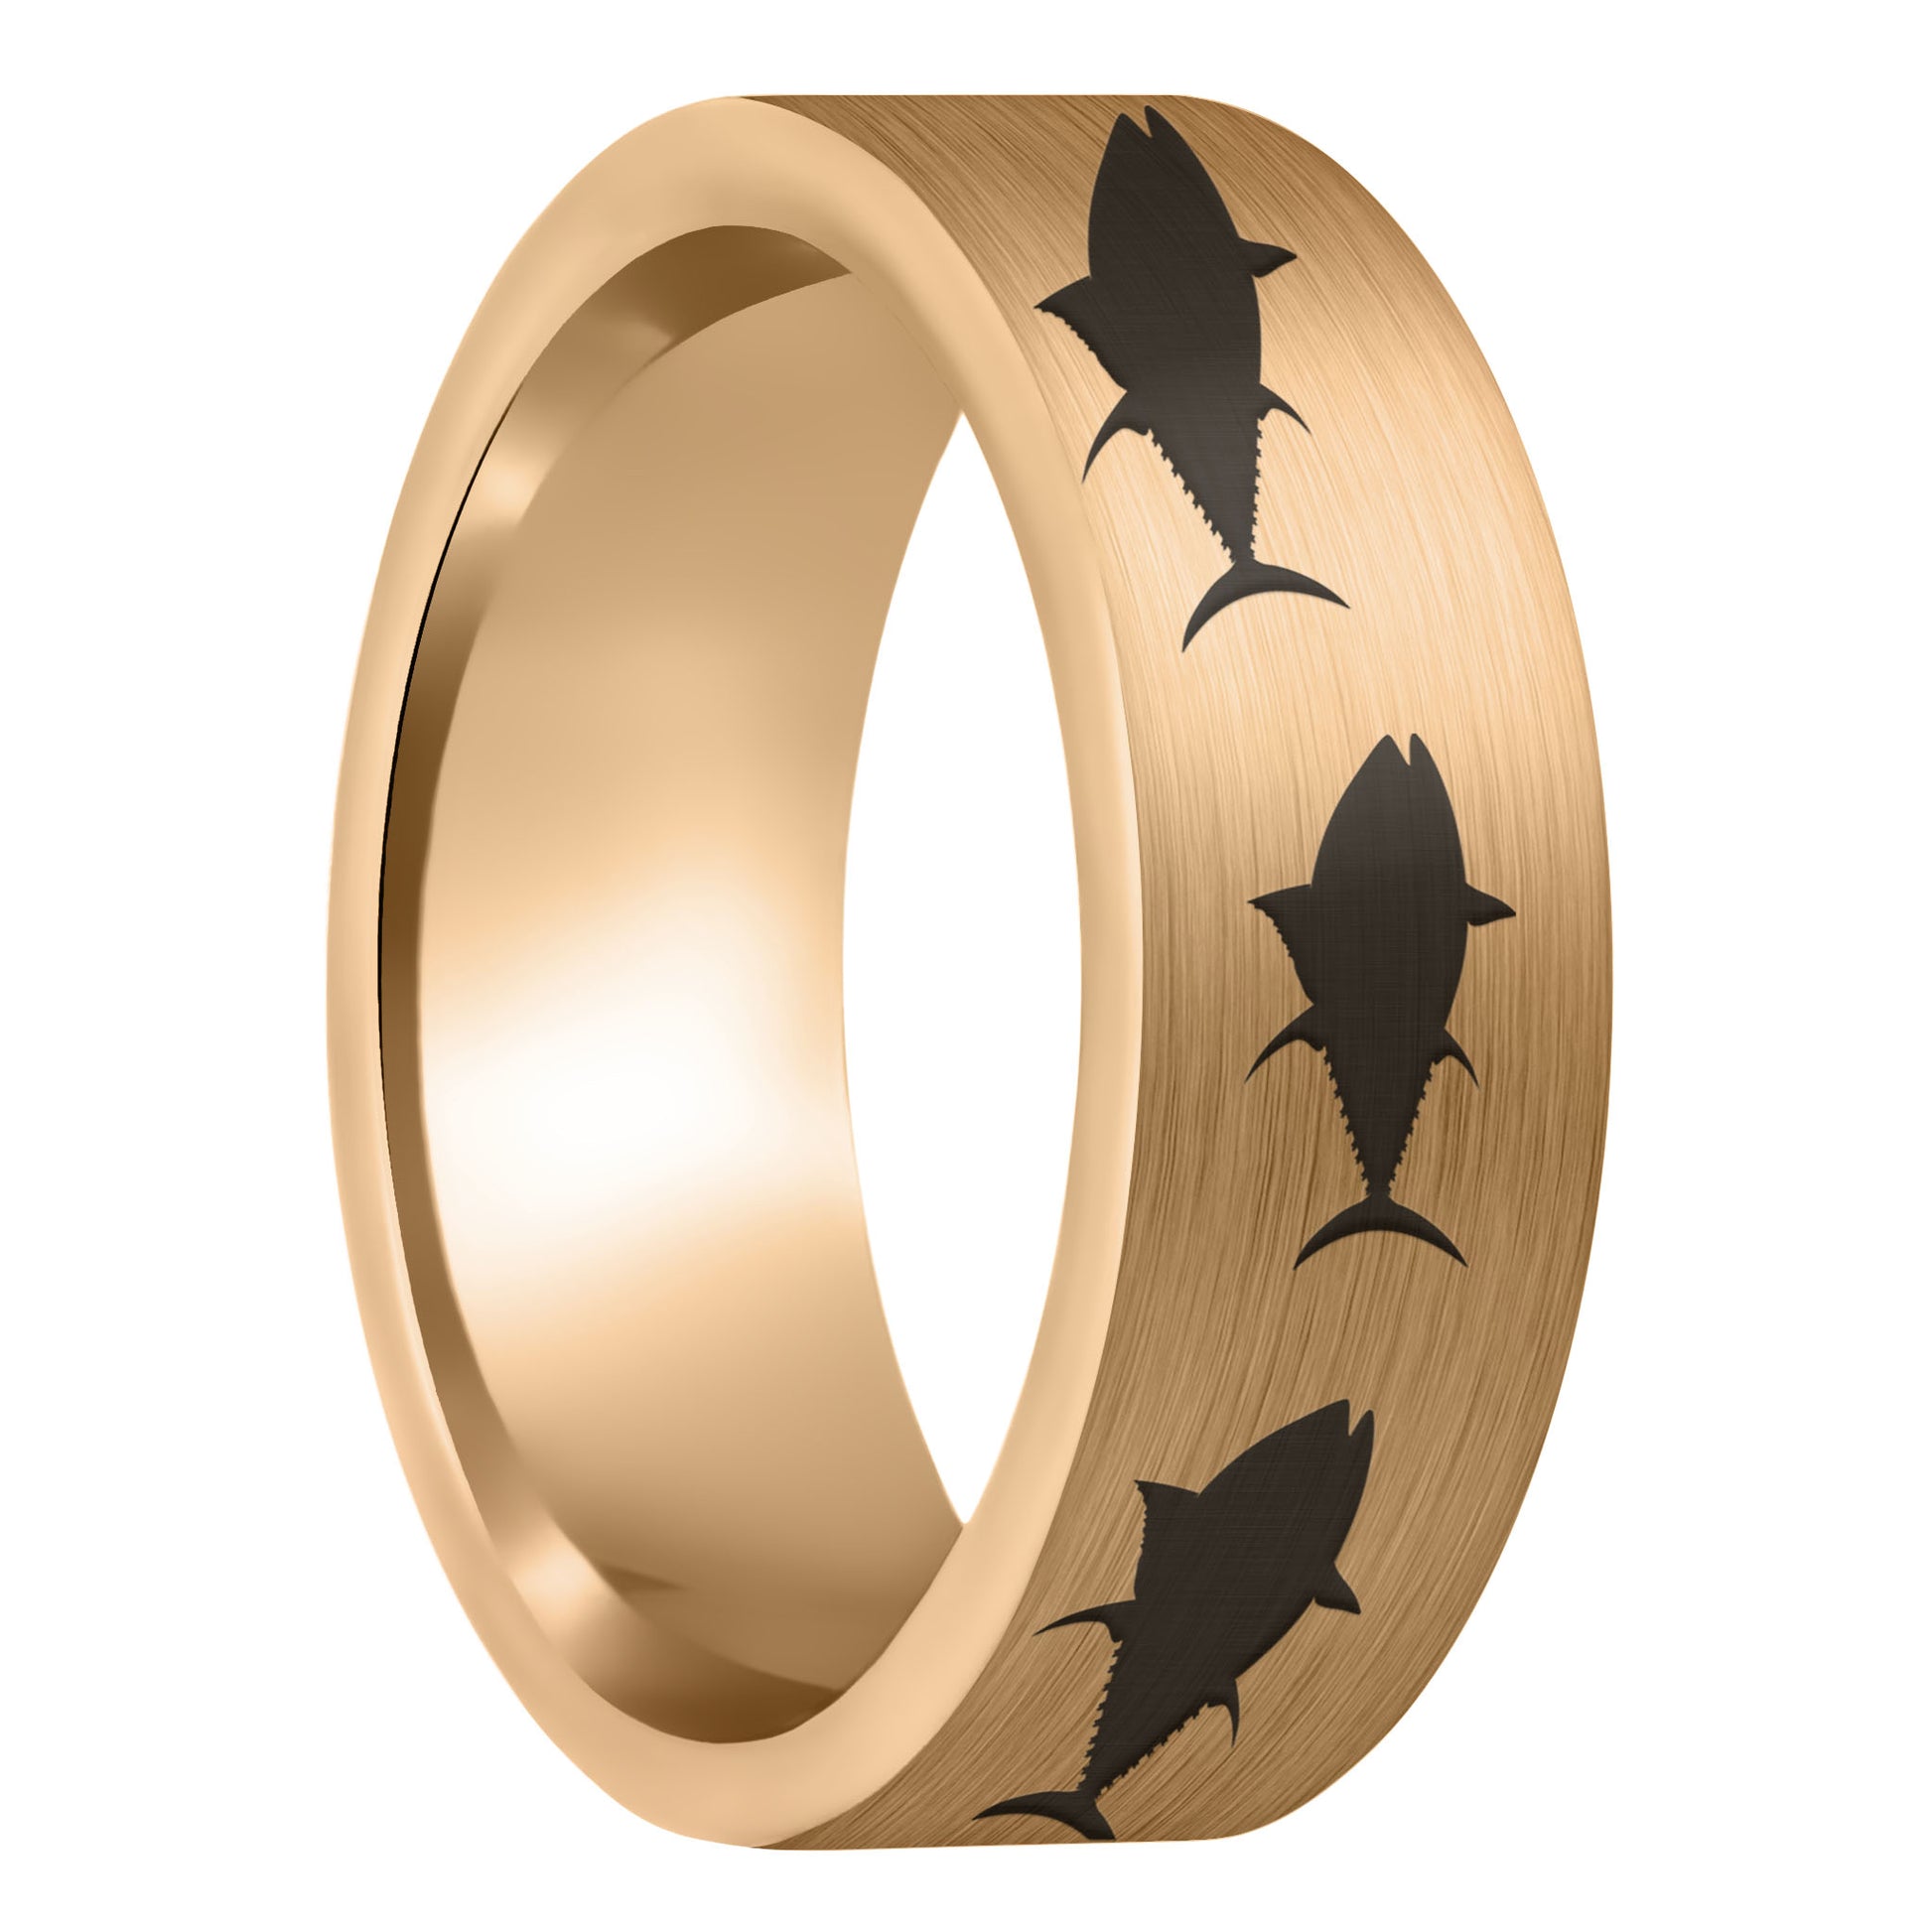 A yellowfin tuna fish brushed rose gold tungsten men's wedding band displayed on a plain white background.